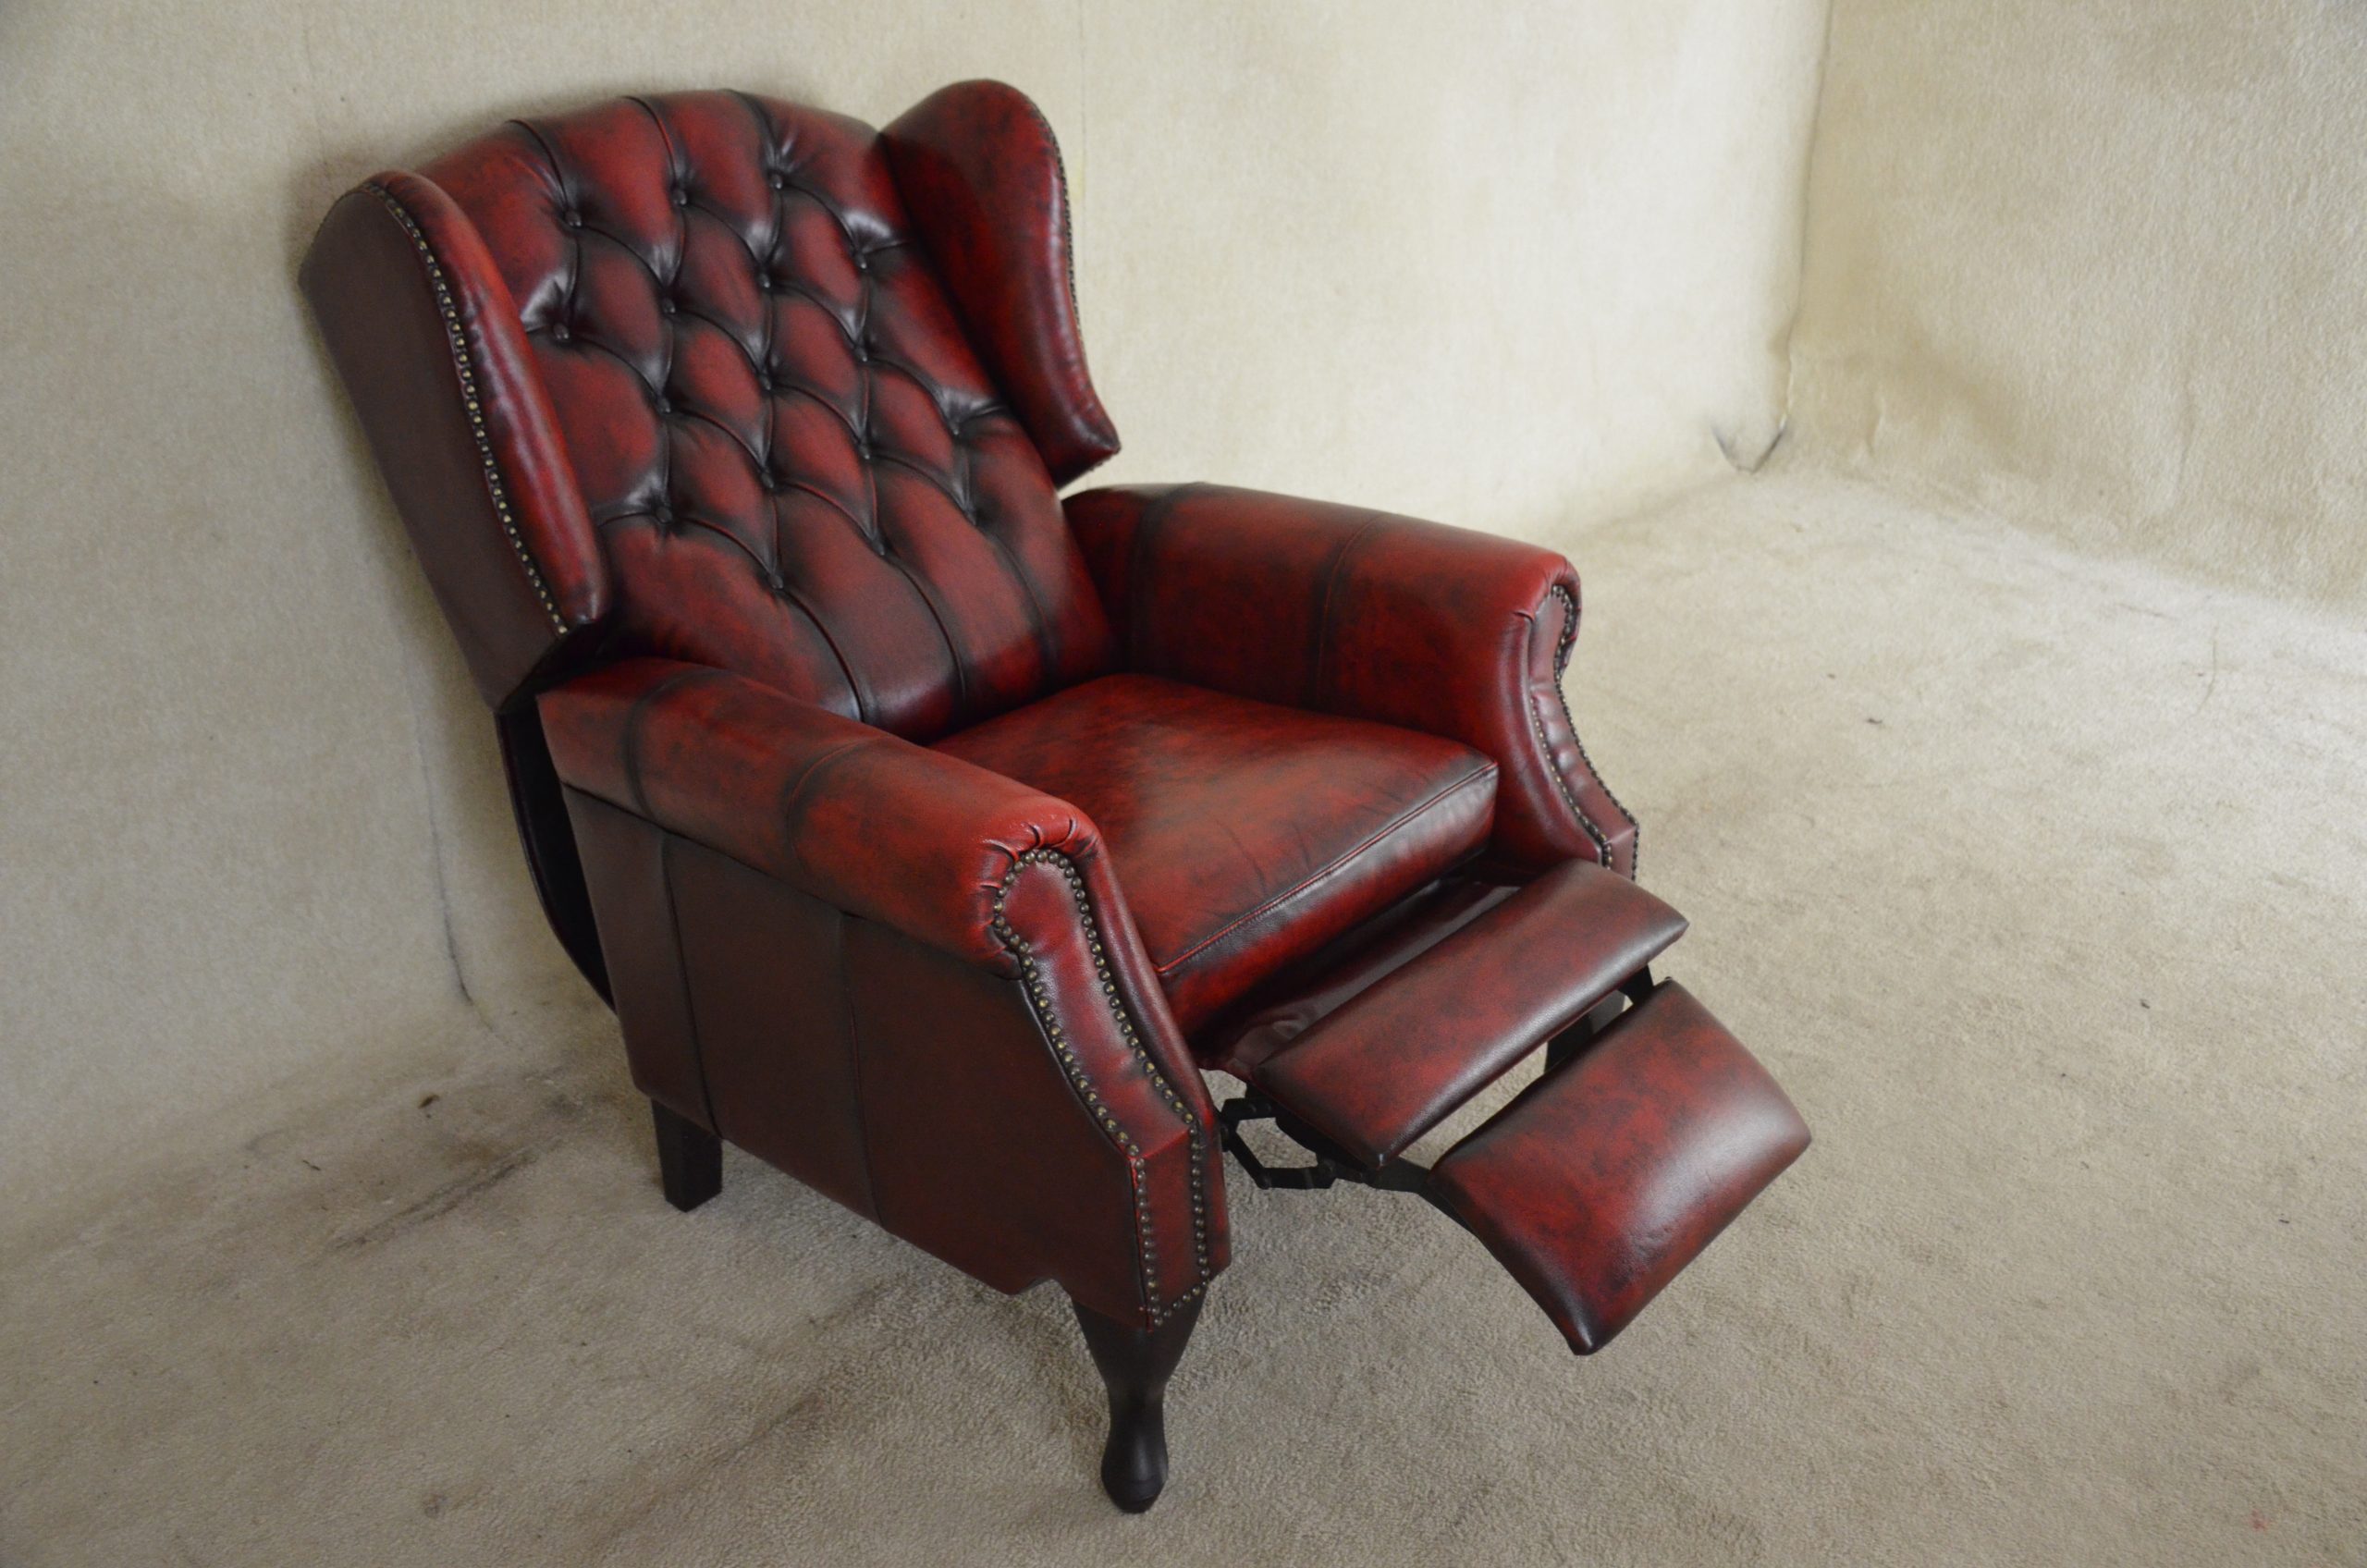 high back relaxfauteuil occasion in antique red